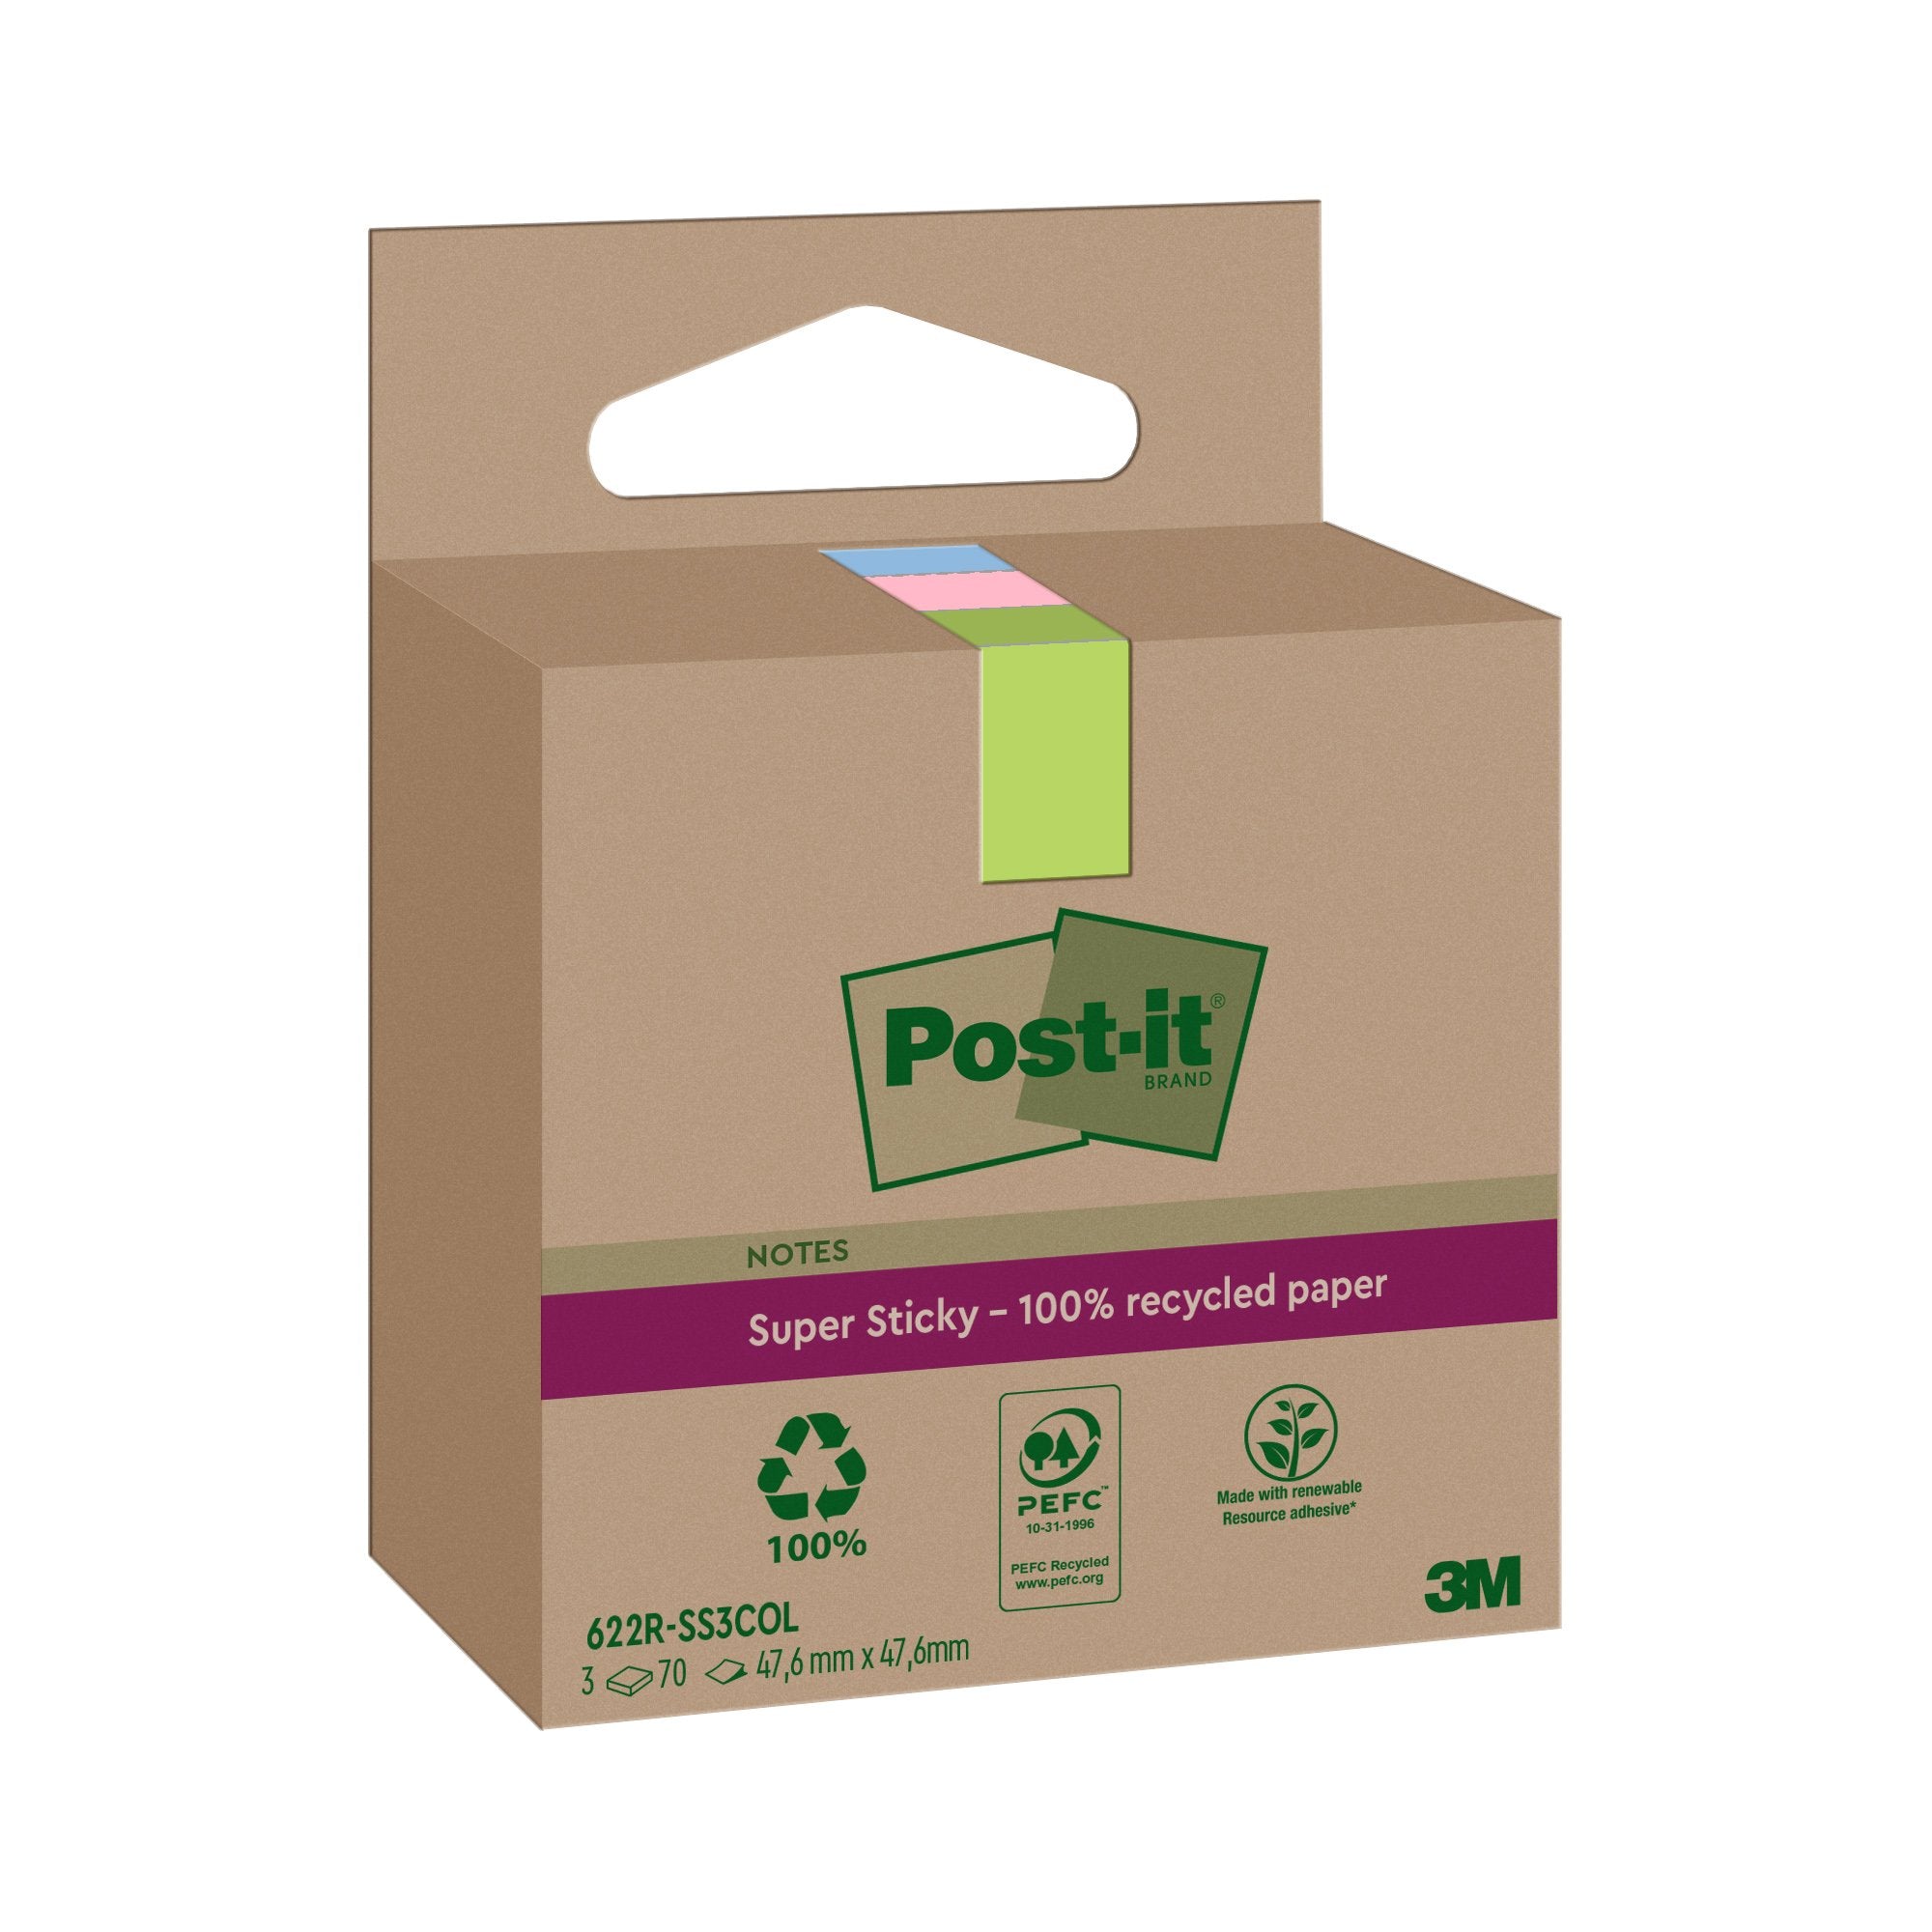 post-it-cf-3pz-blocco-70fg-supersticky-green-47-6x47x6mm-622r-ss3col-pastello